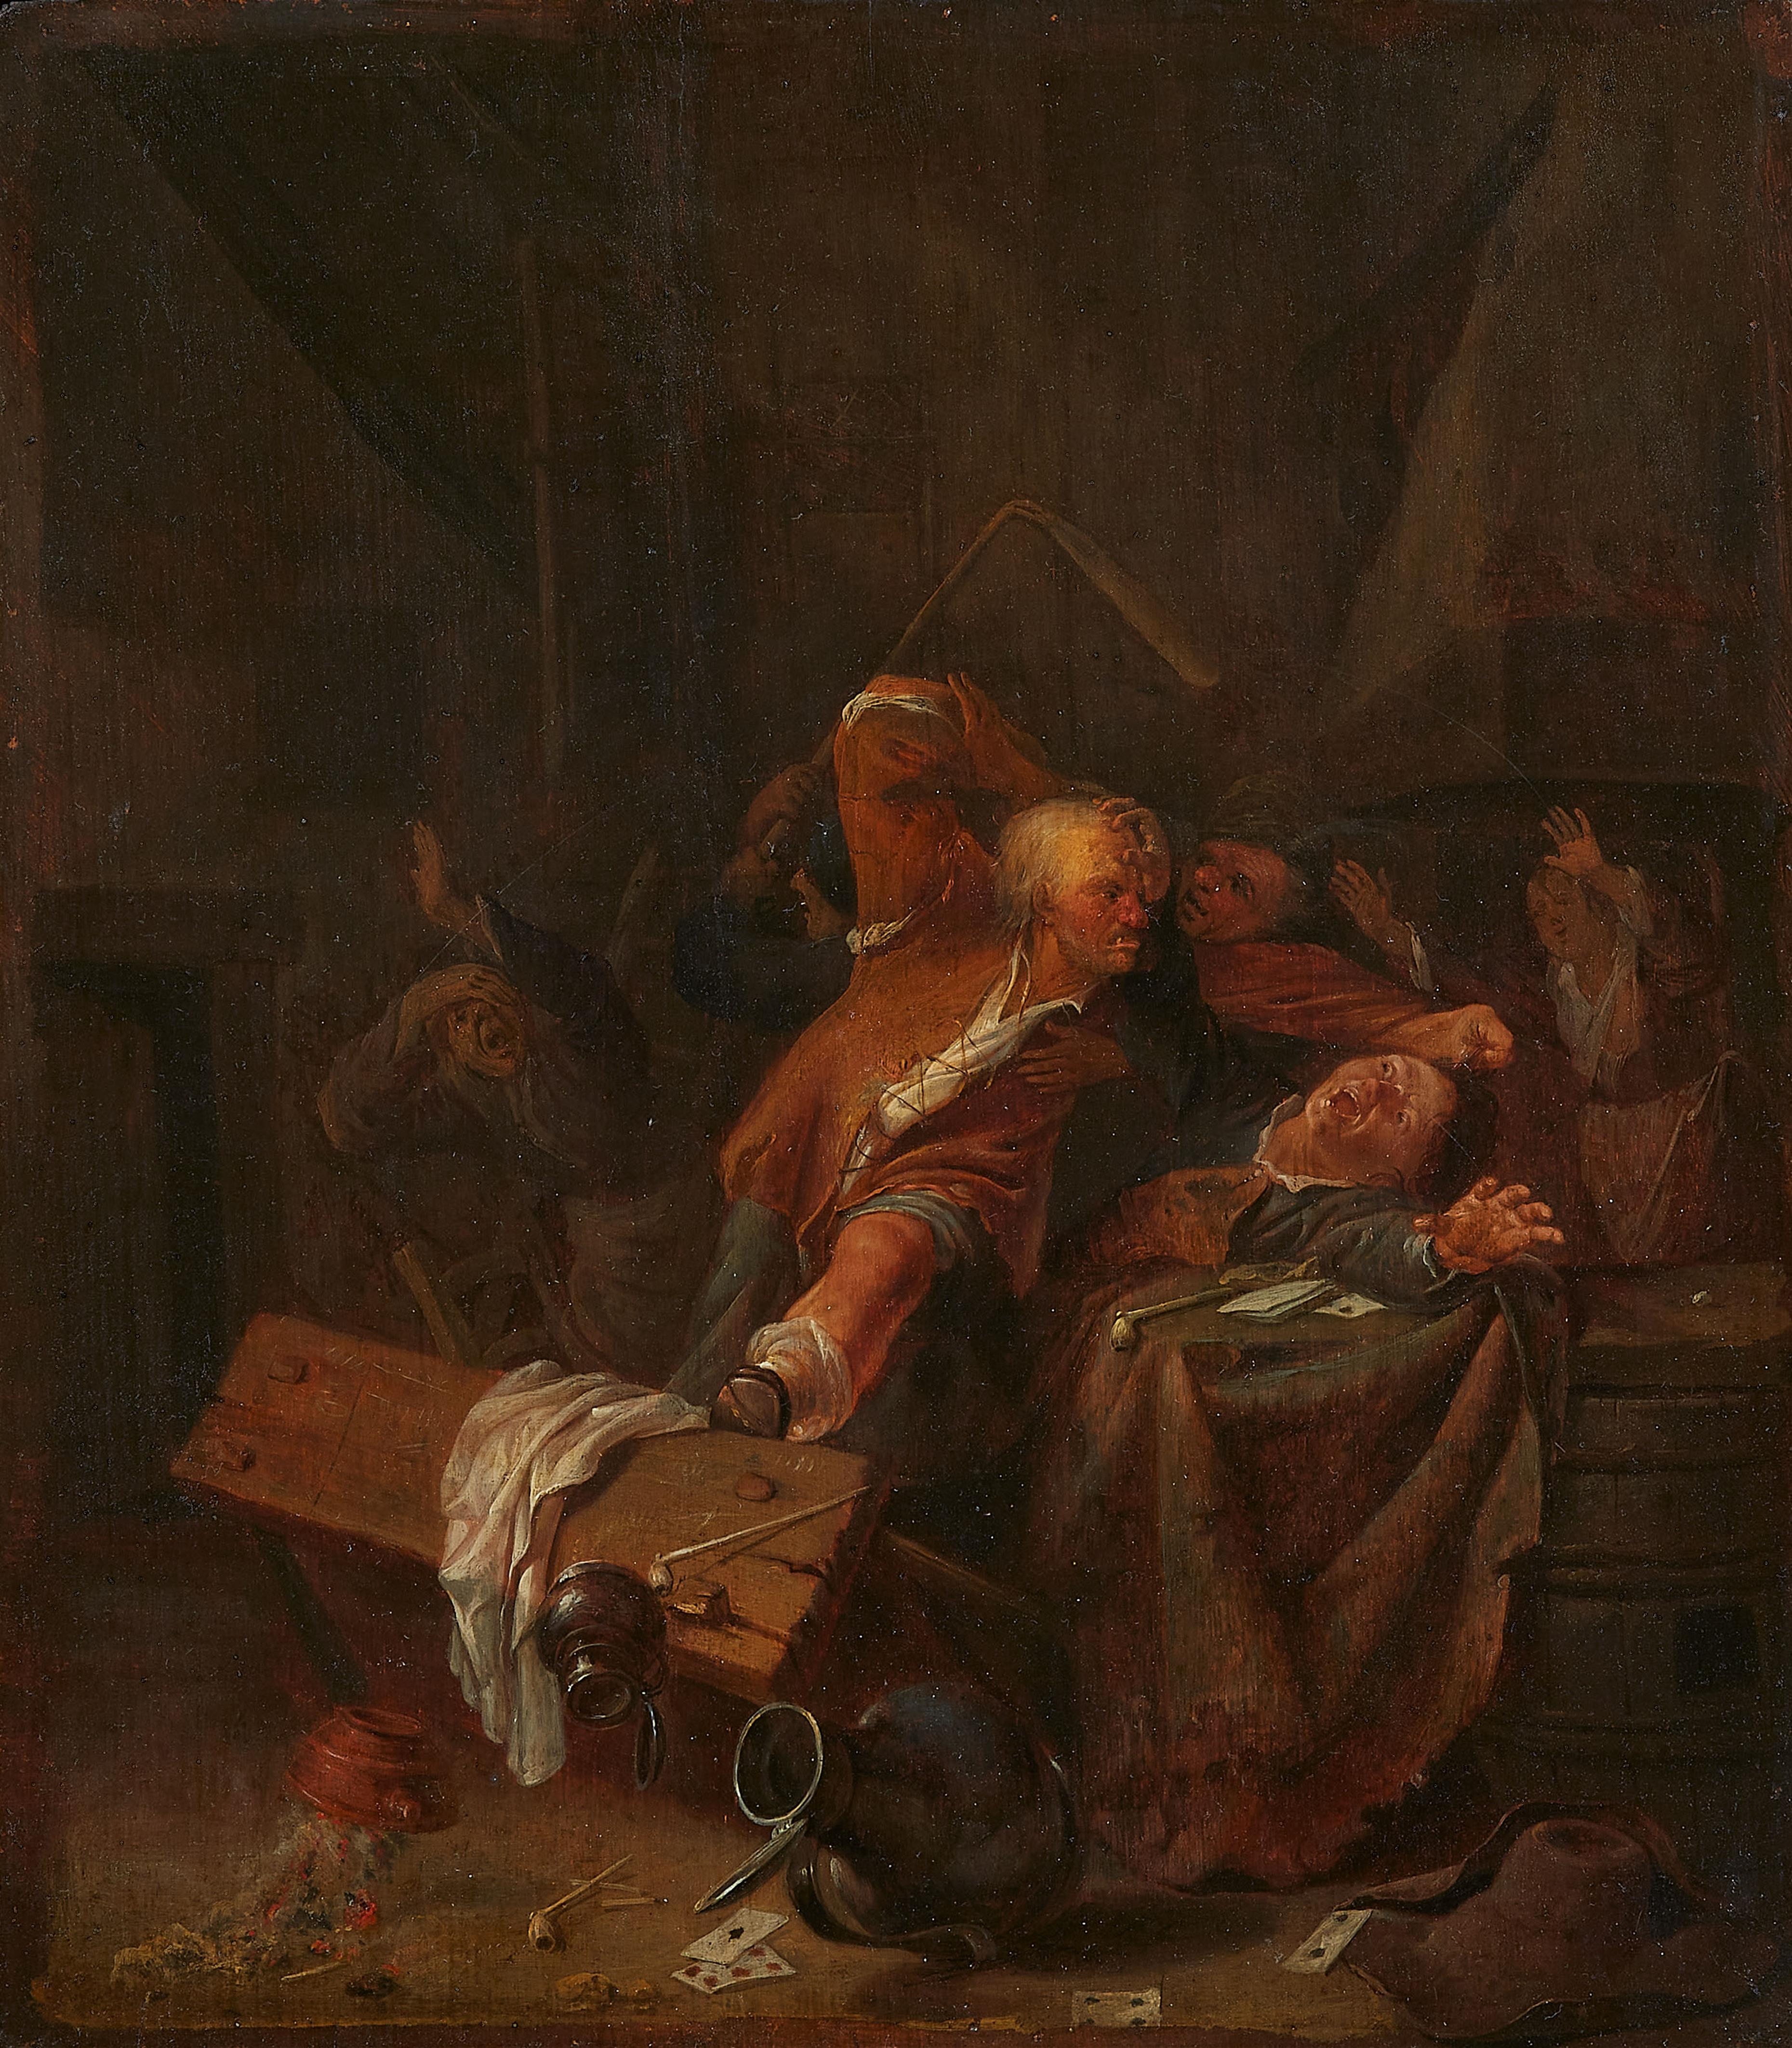 Adriaen Brouwer, attributed to Fight in a Tavern Oil on panel (parquetted). 30.5 x 27 cm. by Adriaen Brouwer